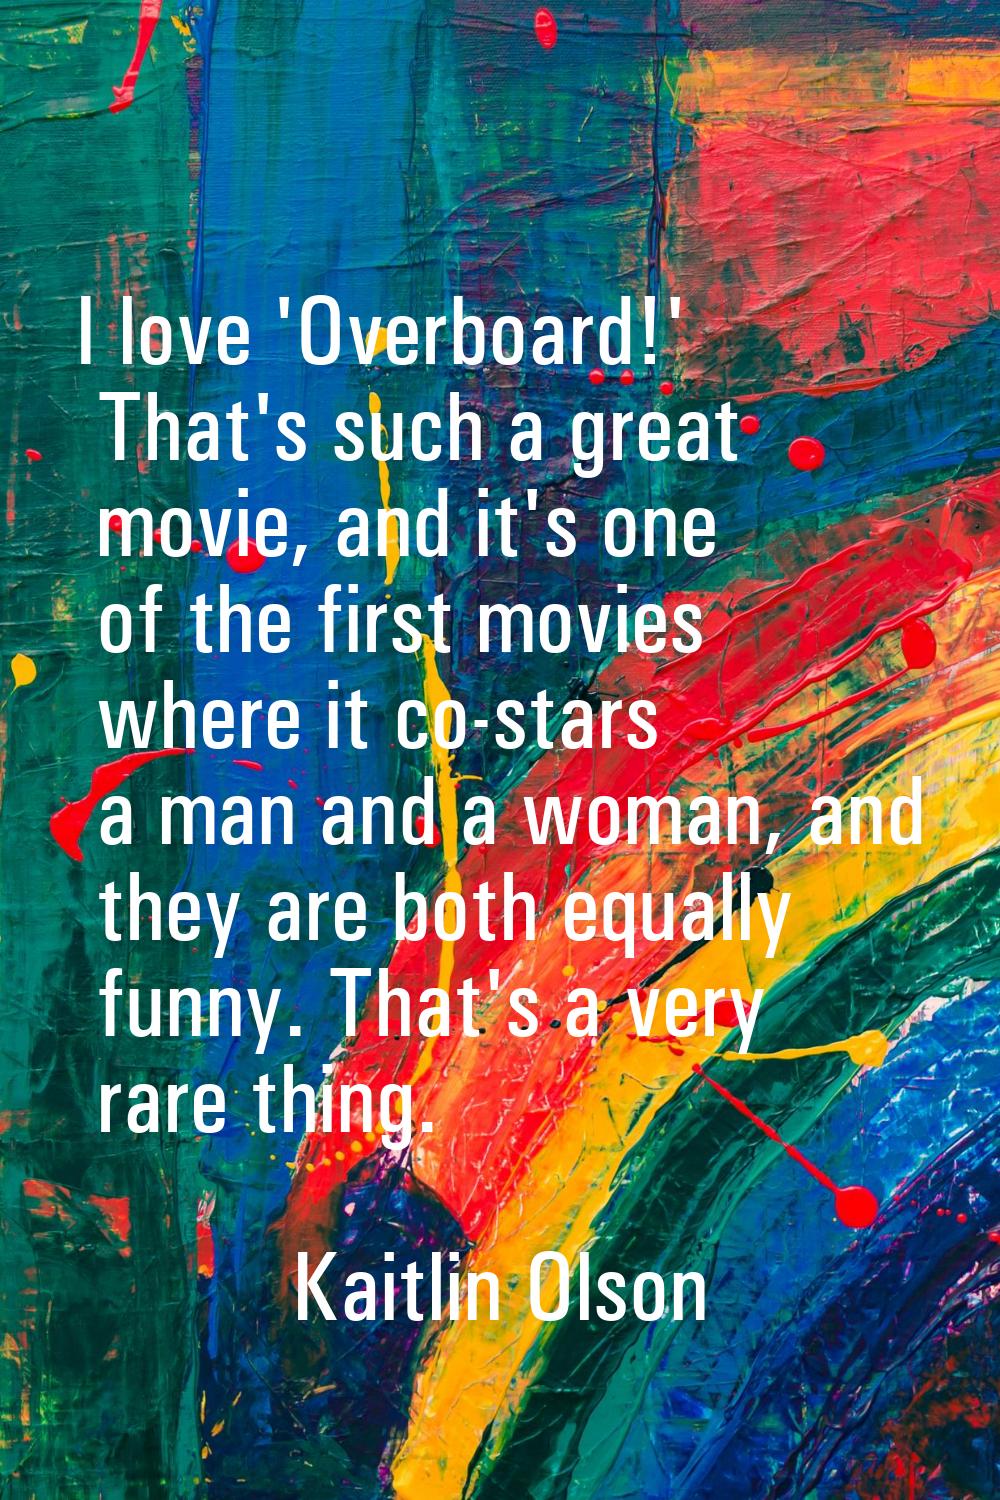 I love 'Overboard!' That's such a great movie, and it's one of the first movies where it co-stars a